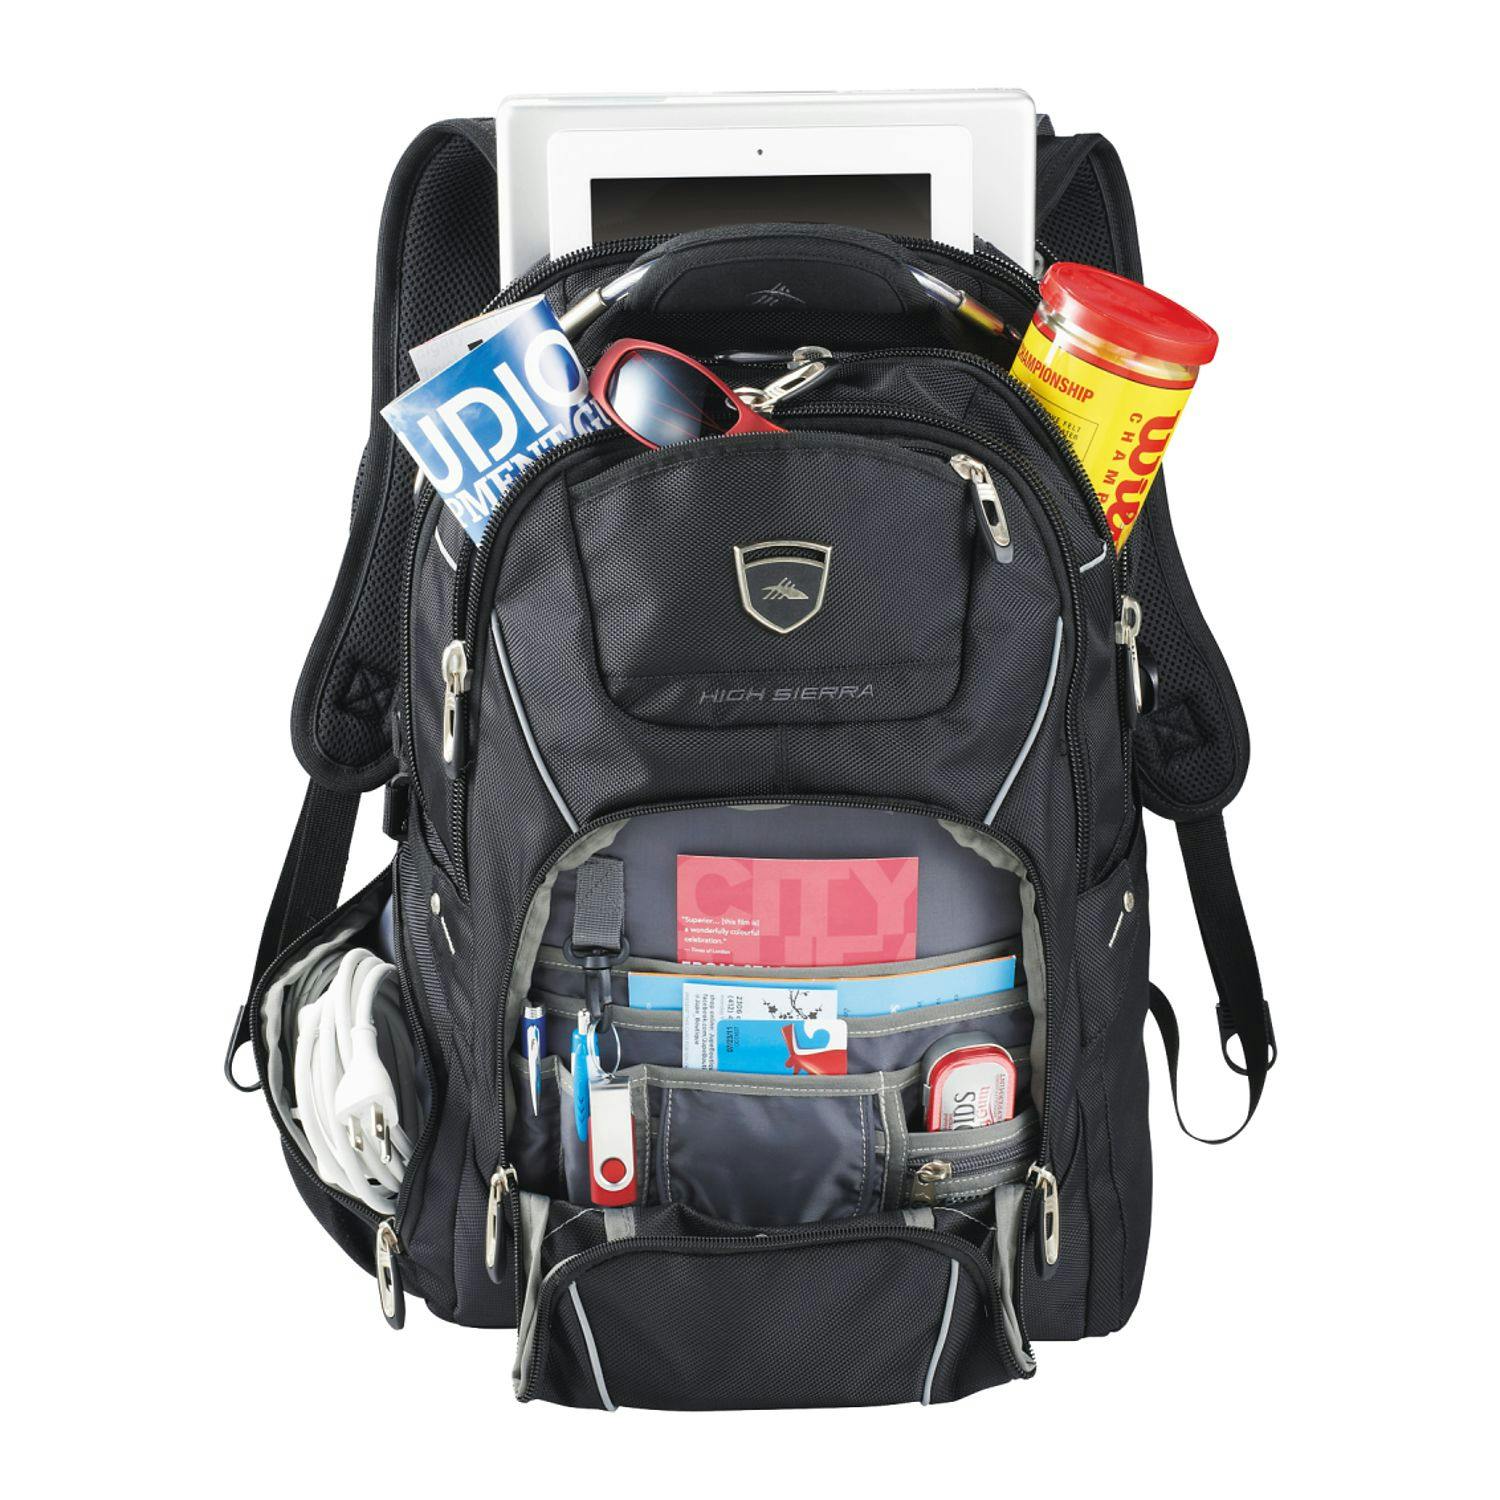 High Sierra Elite Fly-By 17" Computer Backpack - additional Image 4